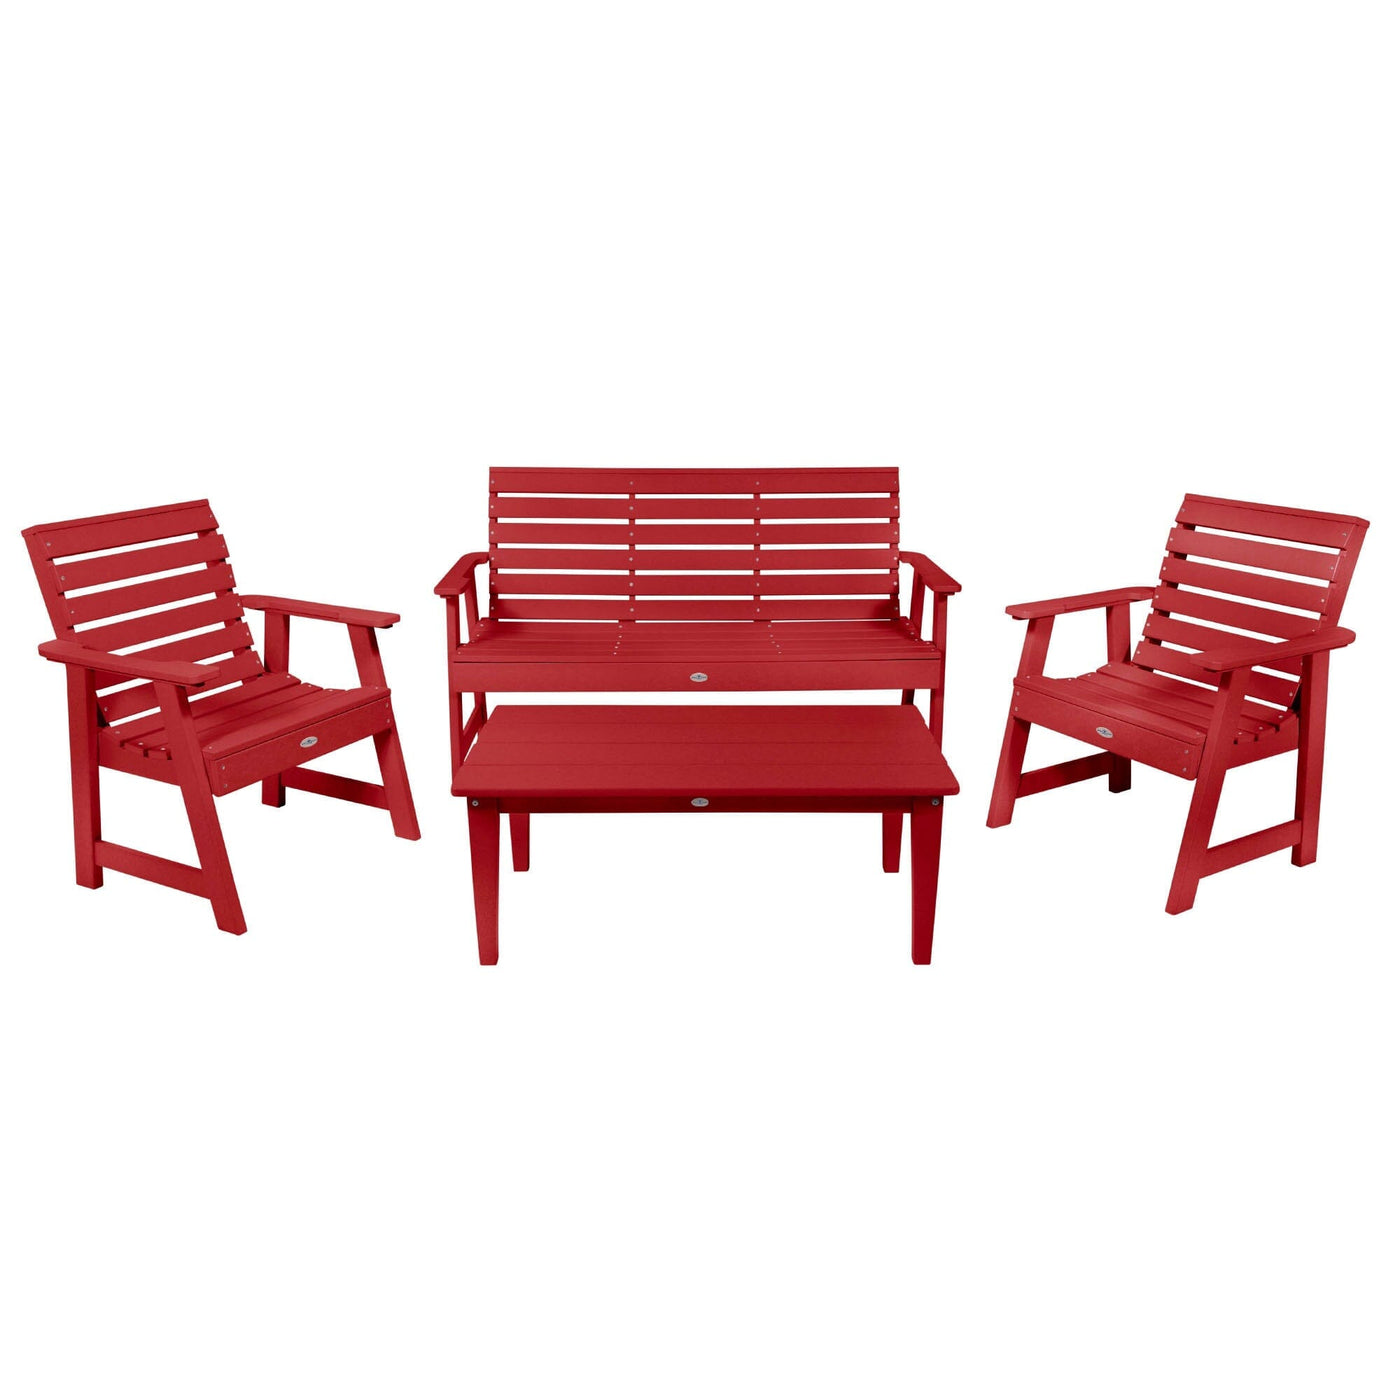 Riverside Garden Bench 5ft, 2 Garden Chairs and Conversation Table Set Kitted Set Bahia Verde Outdoors Boathouse Red 